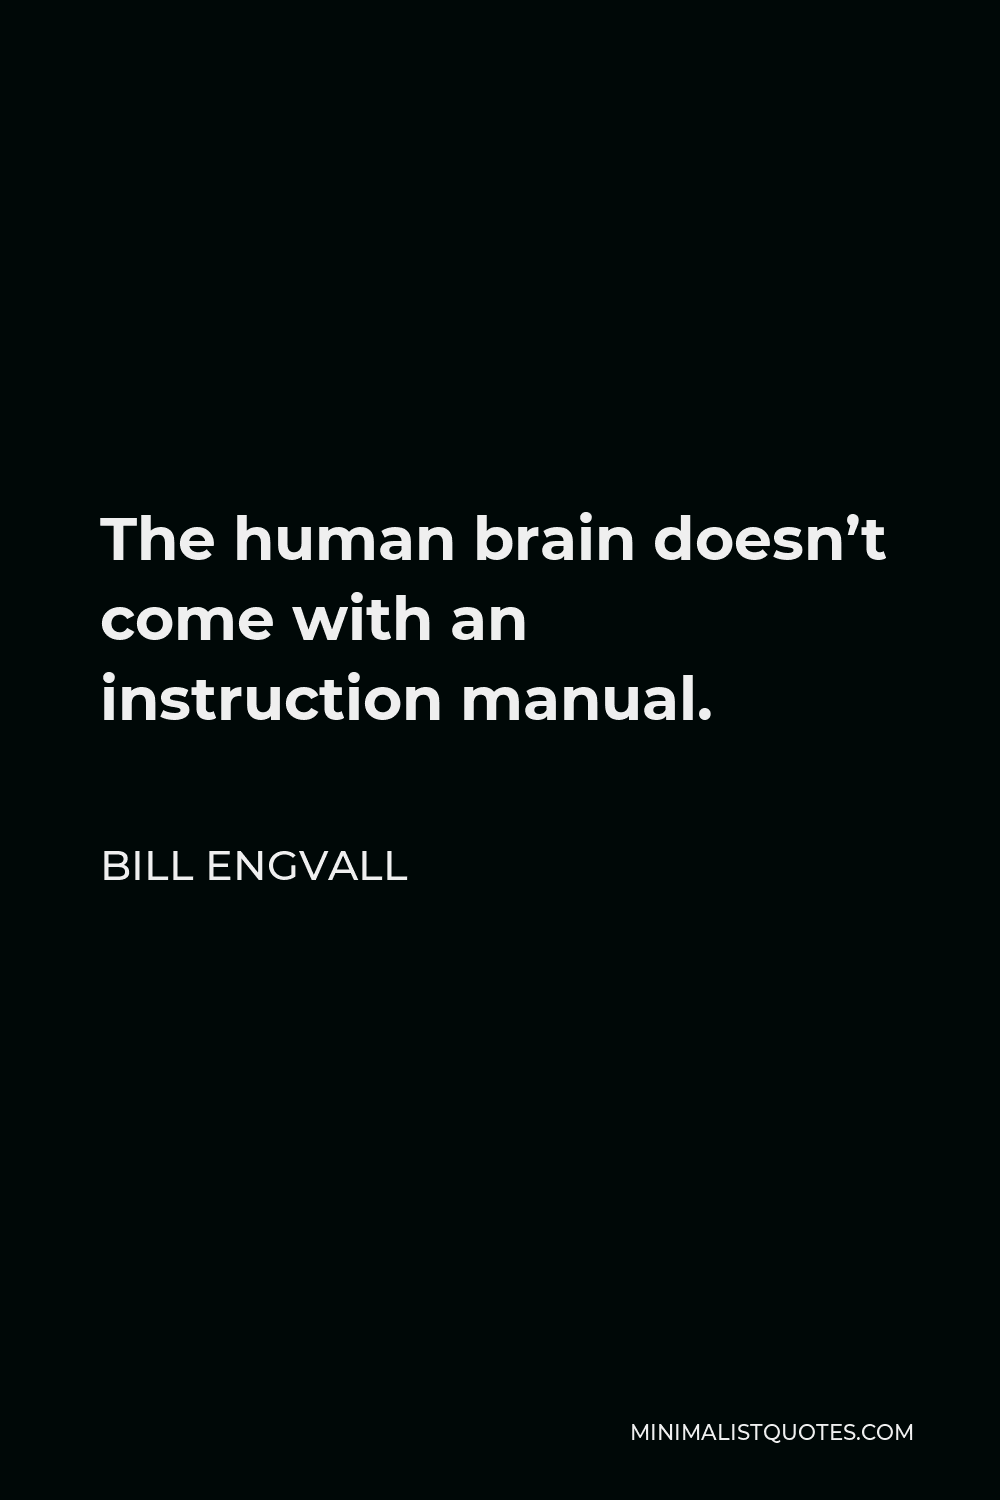 Bill Engvall Quote - The human brain doesn’t come with an instruction manual.